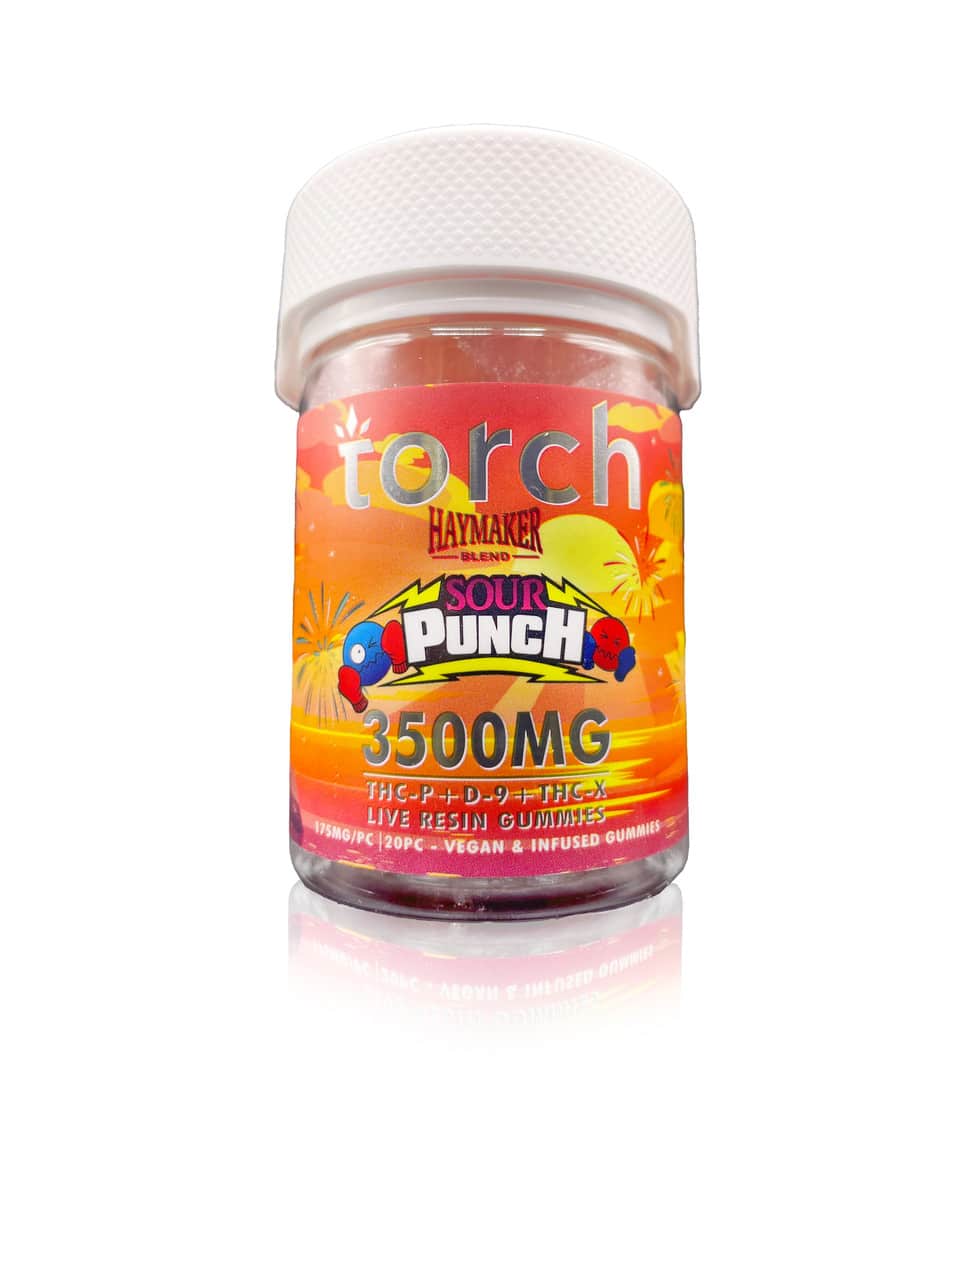 Torch 175mg Live Resin D9 + THCP + THCX Gummies (20pc) Best Price